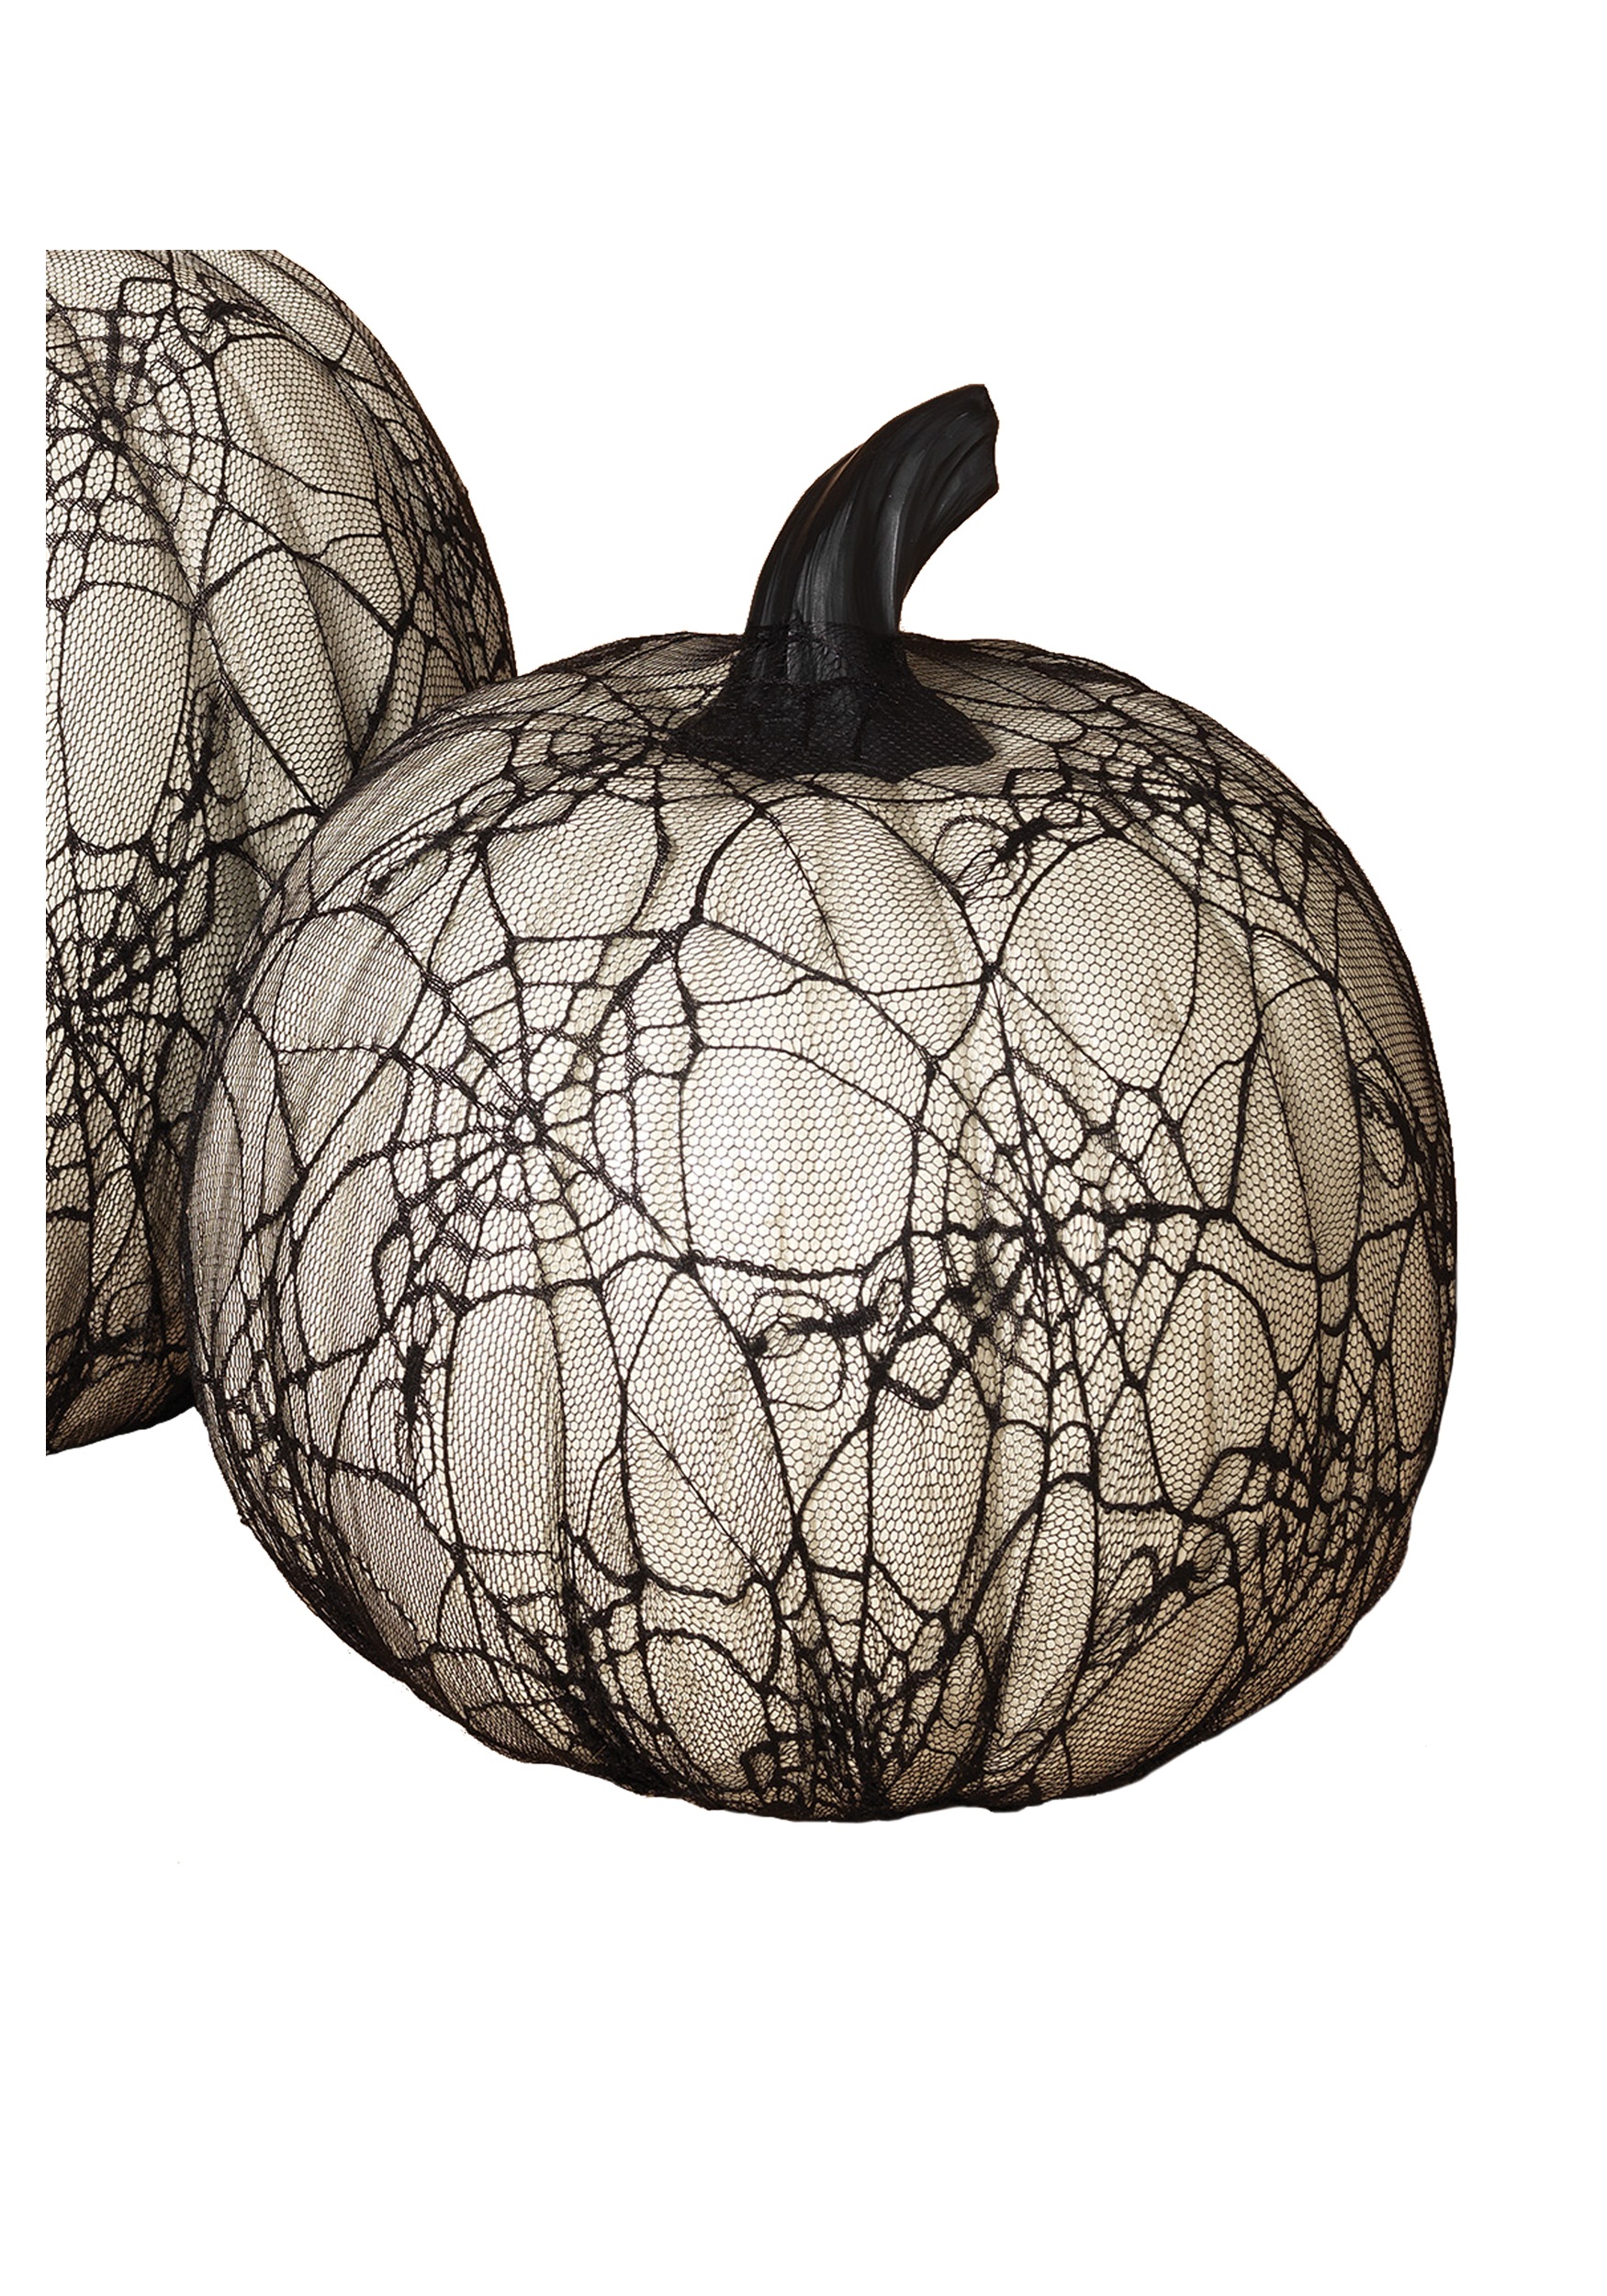 11.4 Inch White Resin Halloween Pumpkin with Spider Web Lace